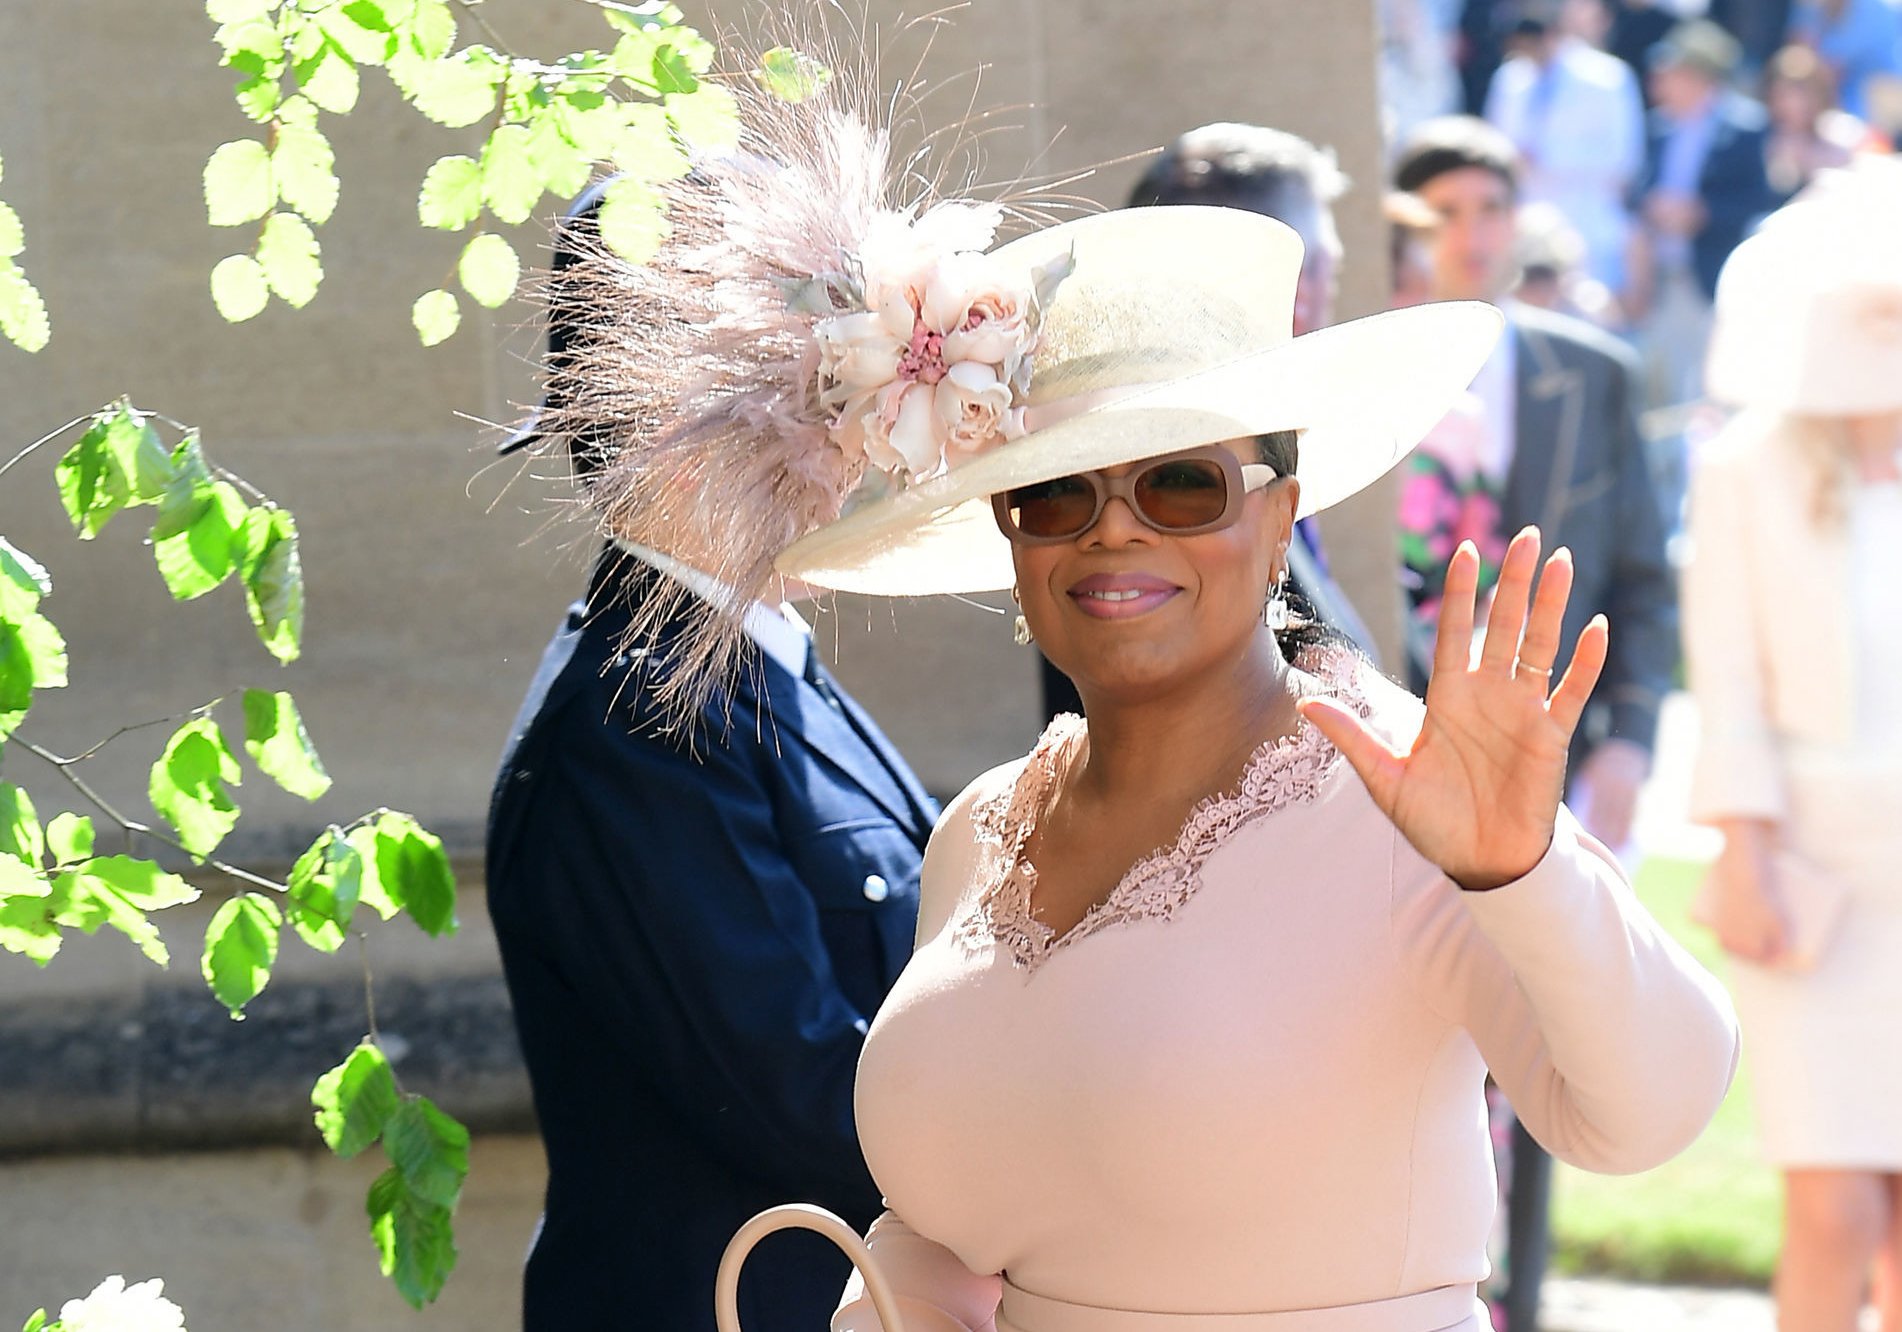 Oprah Winfrey waving to the crowd as she arrives at Prince Harry and Meghan Markle's wedding